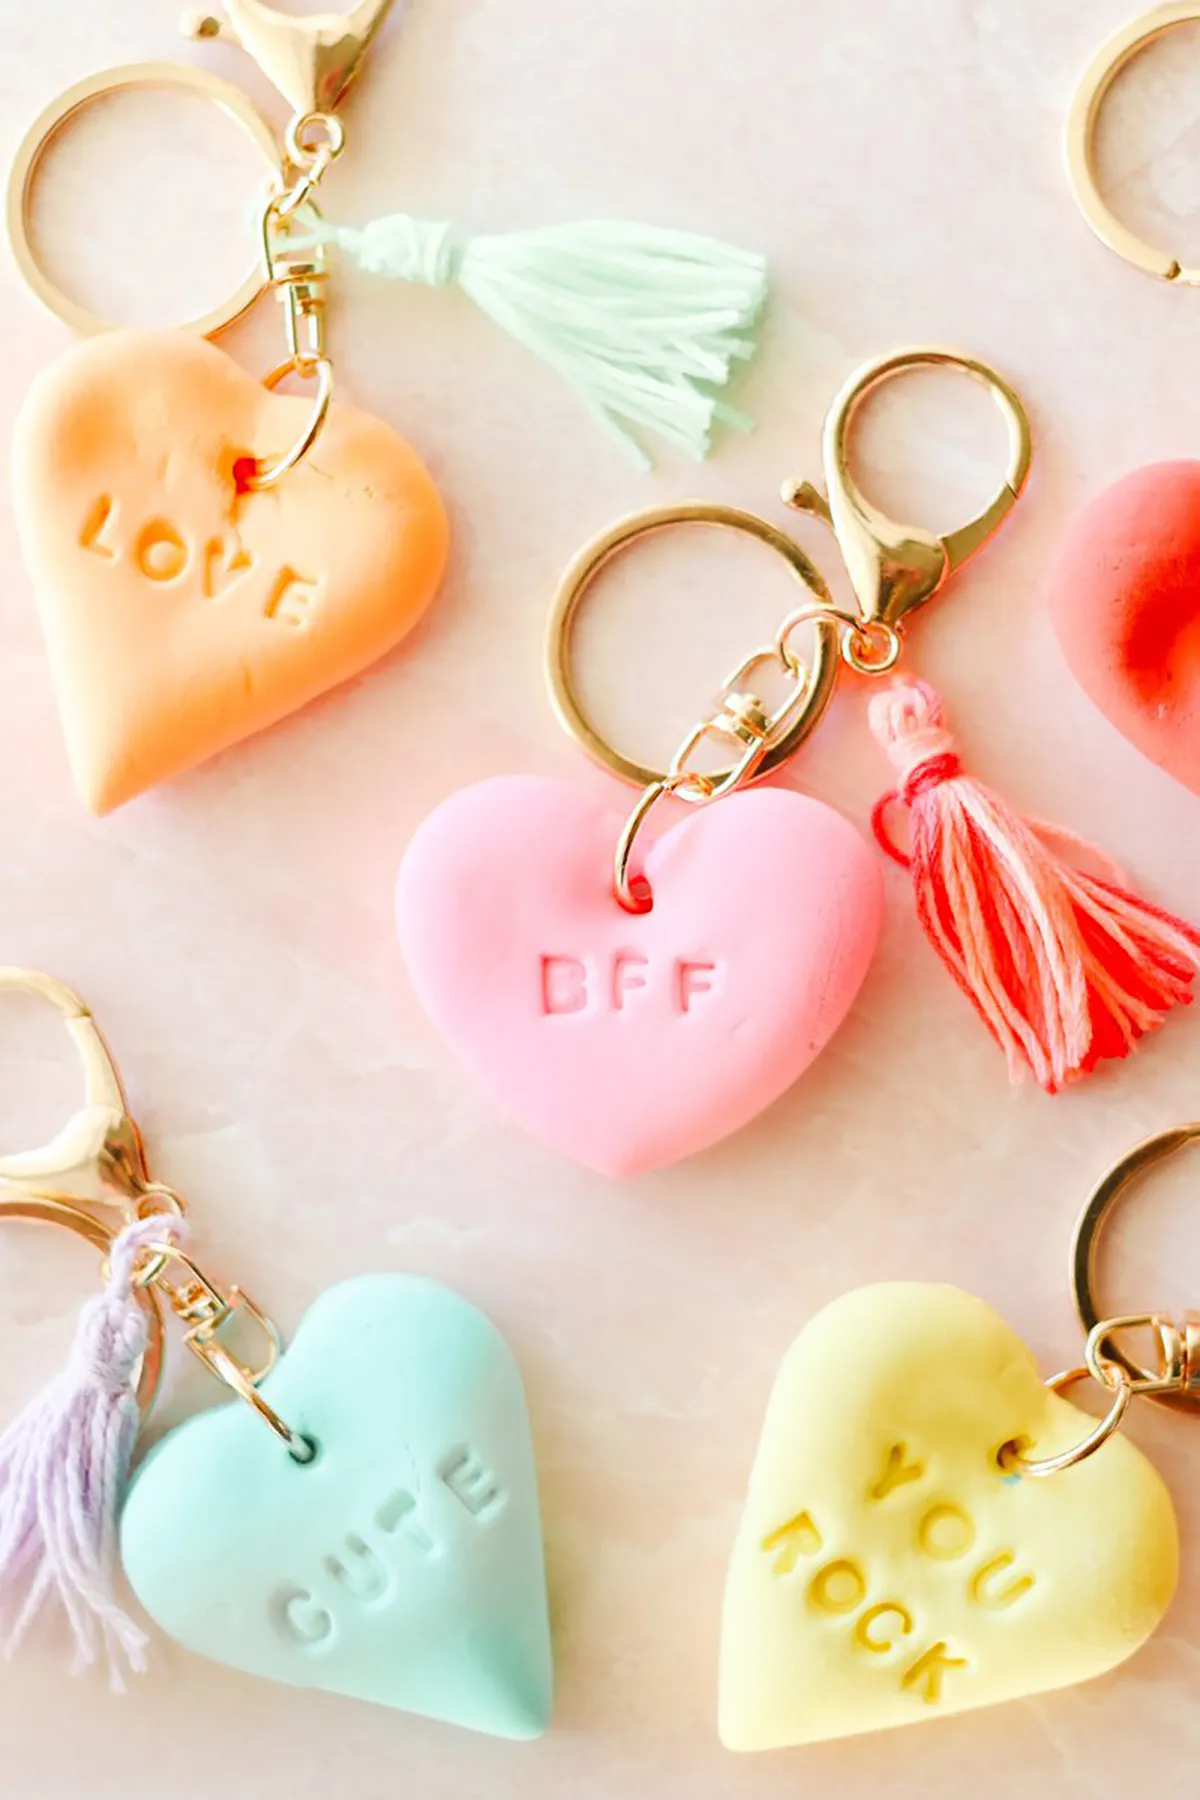 Clay keyrings in heart shapes